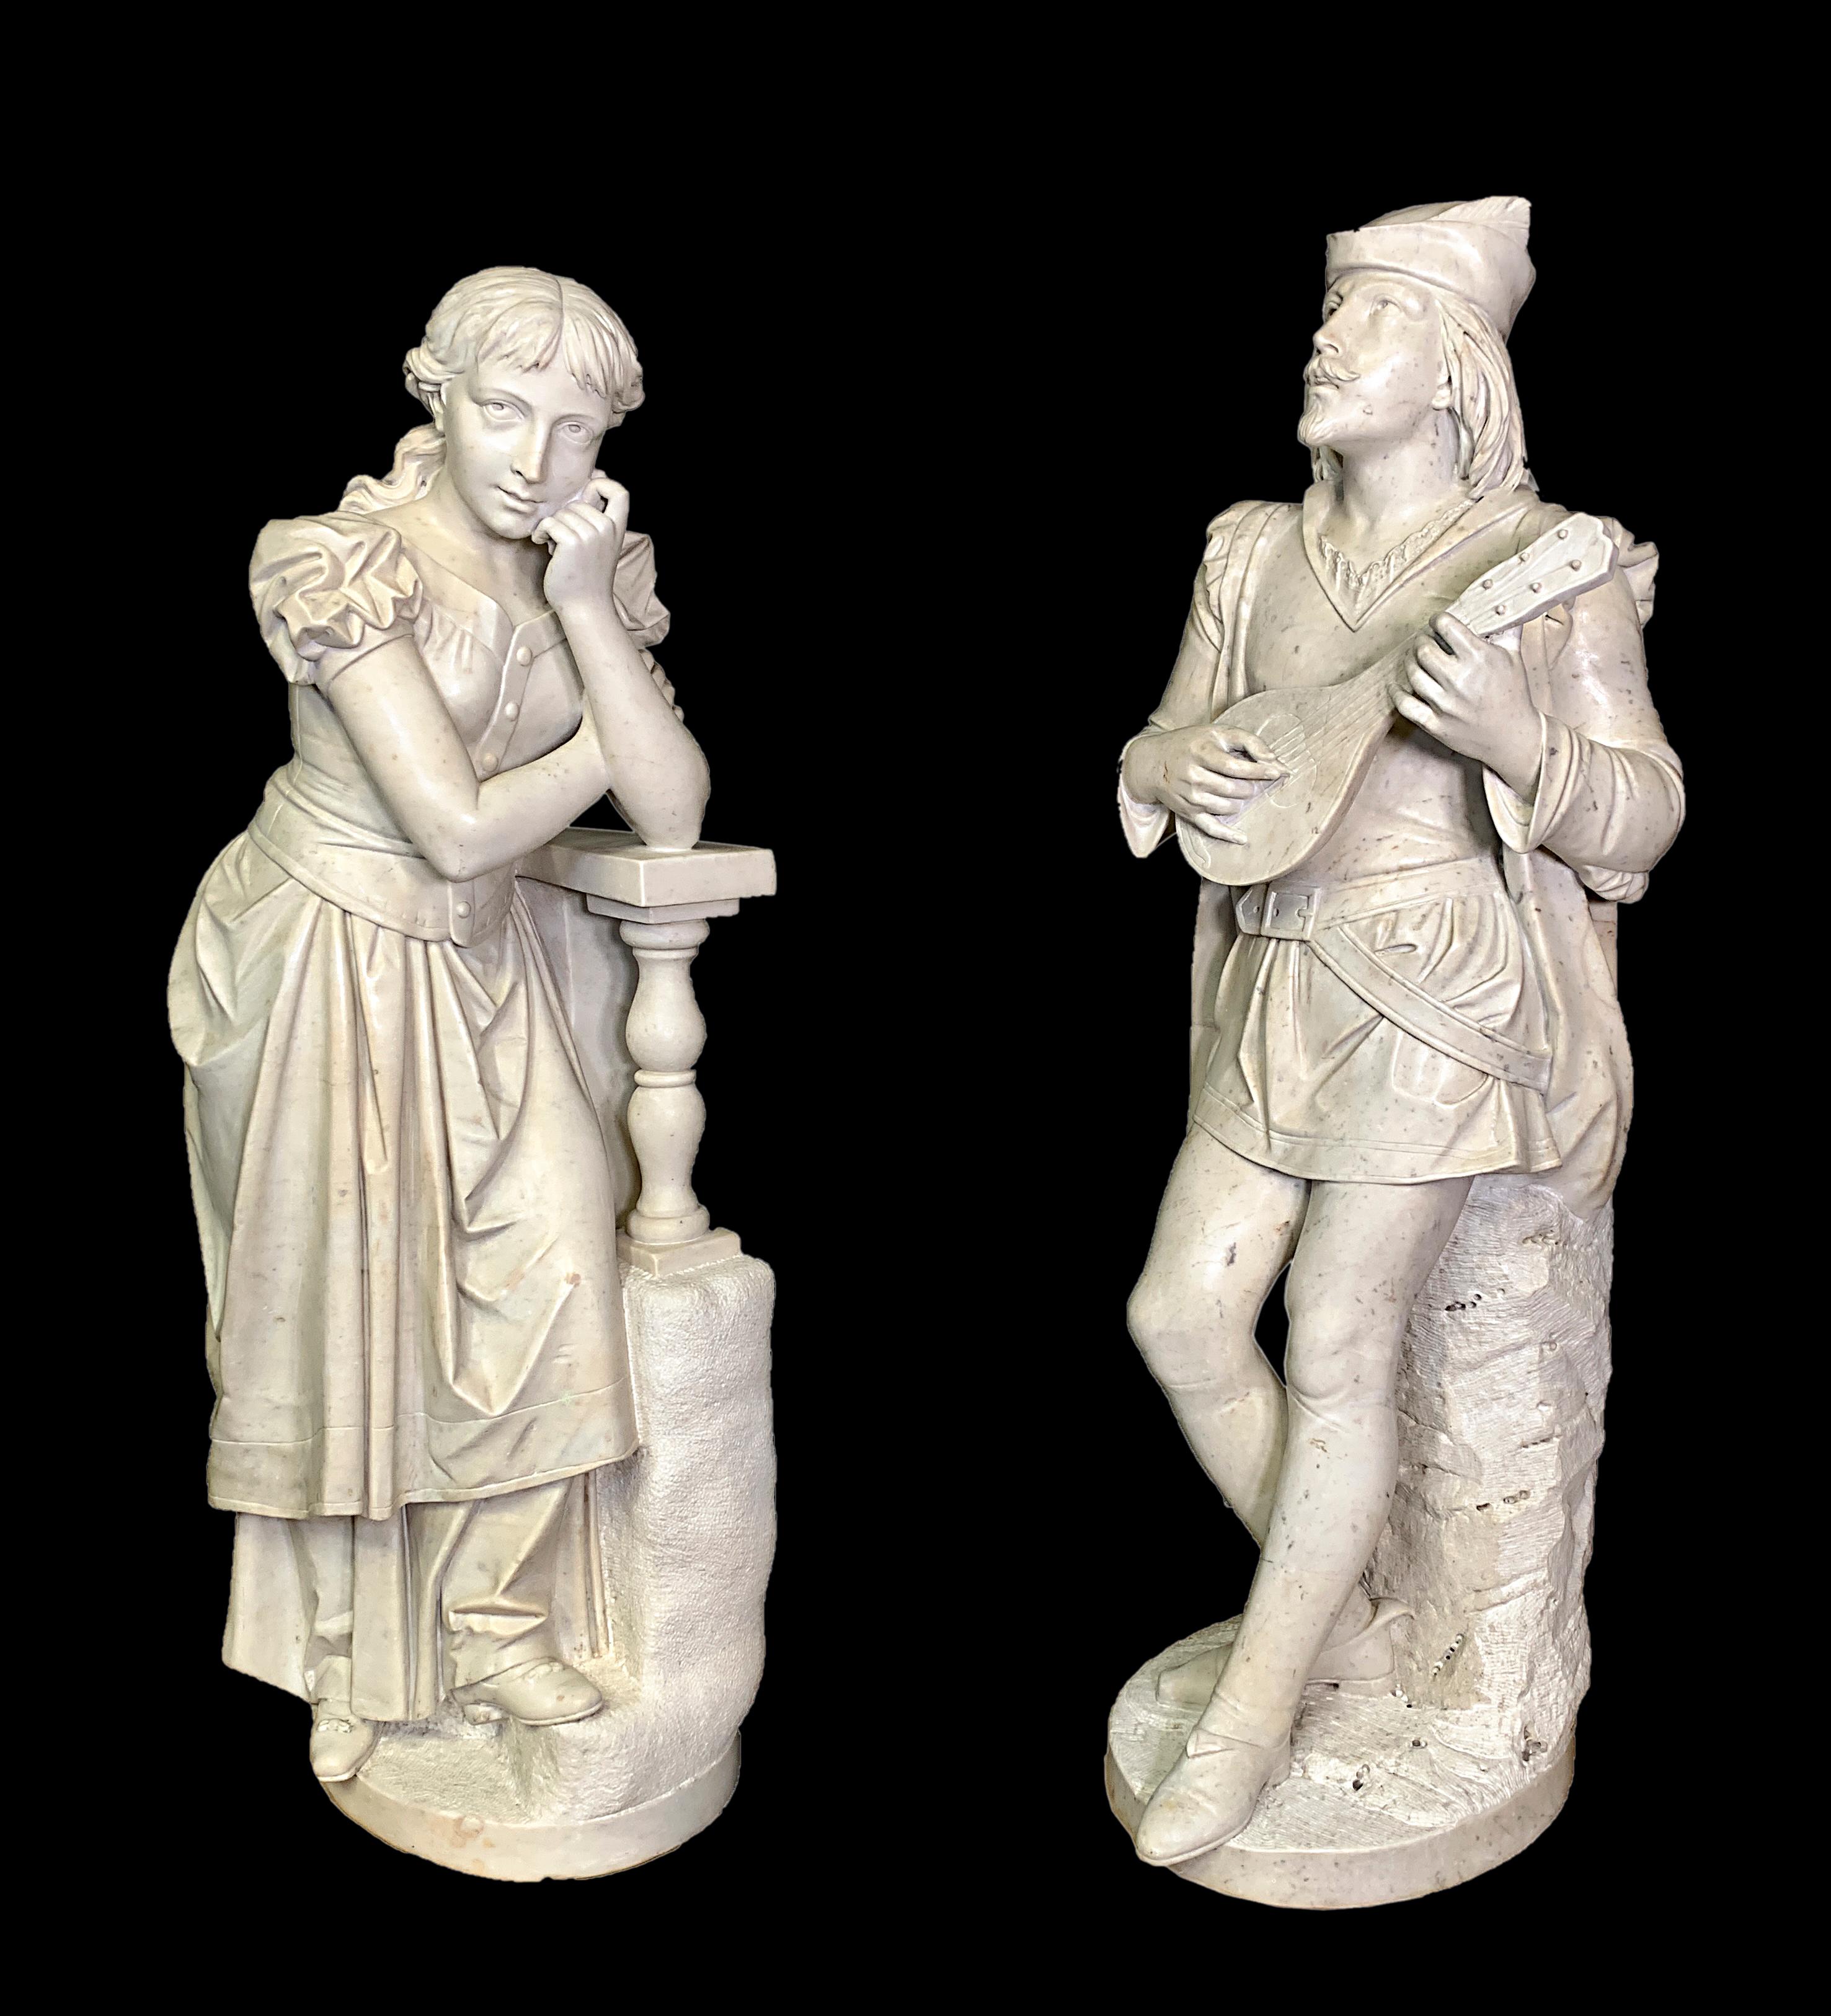 This magnificent pair of antique Italian life-sized hand-carved marble figures depicts Romeo and Juliet, the young lovers in the famous play by William Shakespeare. 

One figure shows a love-struck man gazing up, as a bycoket rests neatly on his